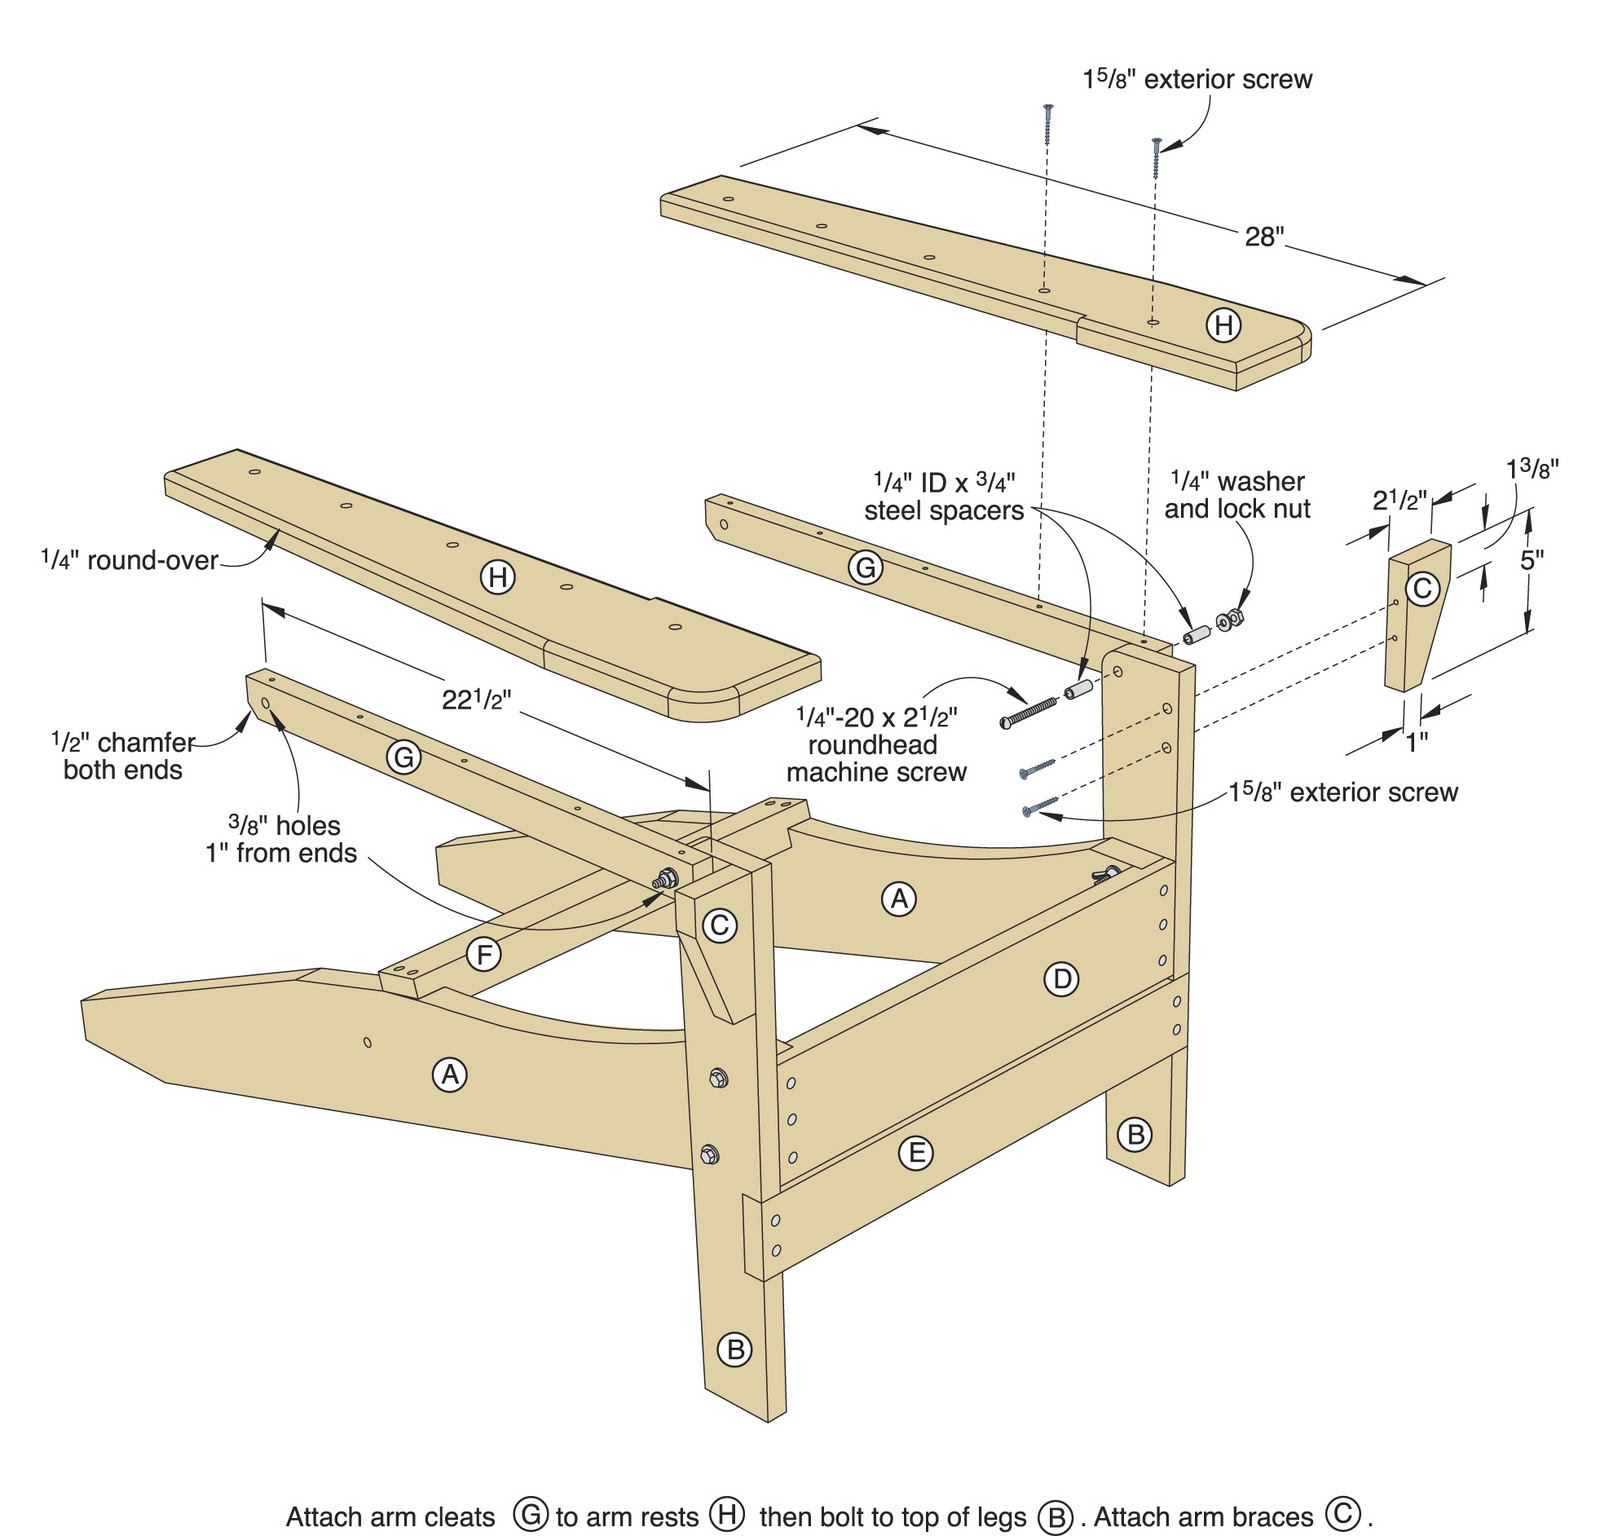 Wood Working Plans , Shed Plans and more: Folding Adirondack Chair Project